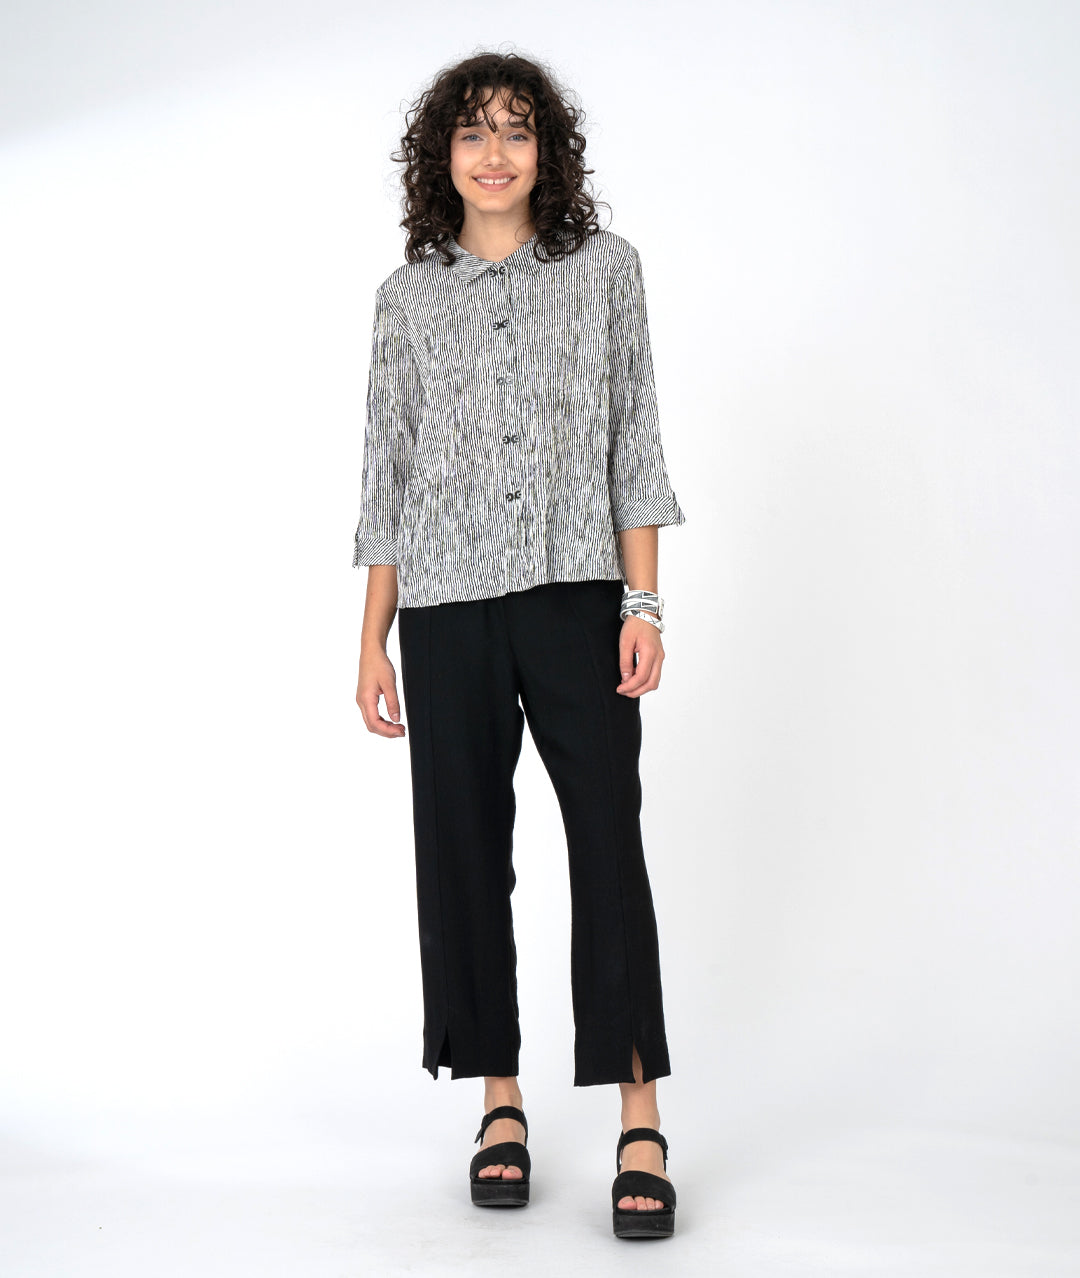 model in a straight leg black pant with a black and white stripe button down blouse with a black twin button down the placket, 3/4 sleeves and a boxy body